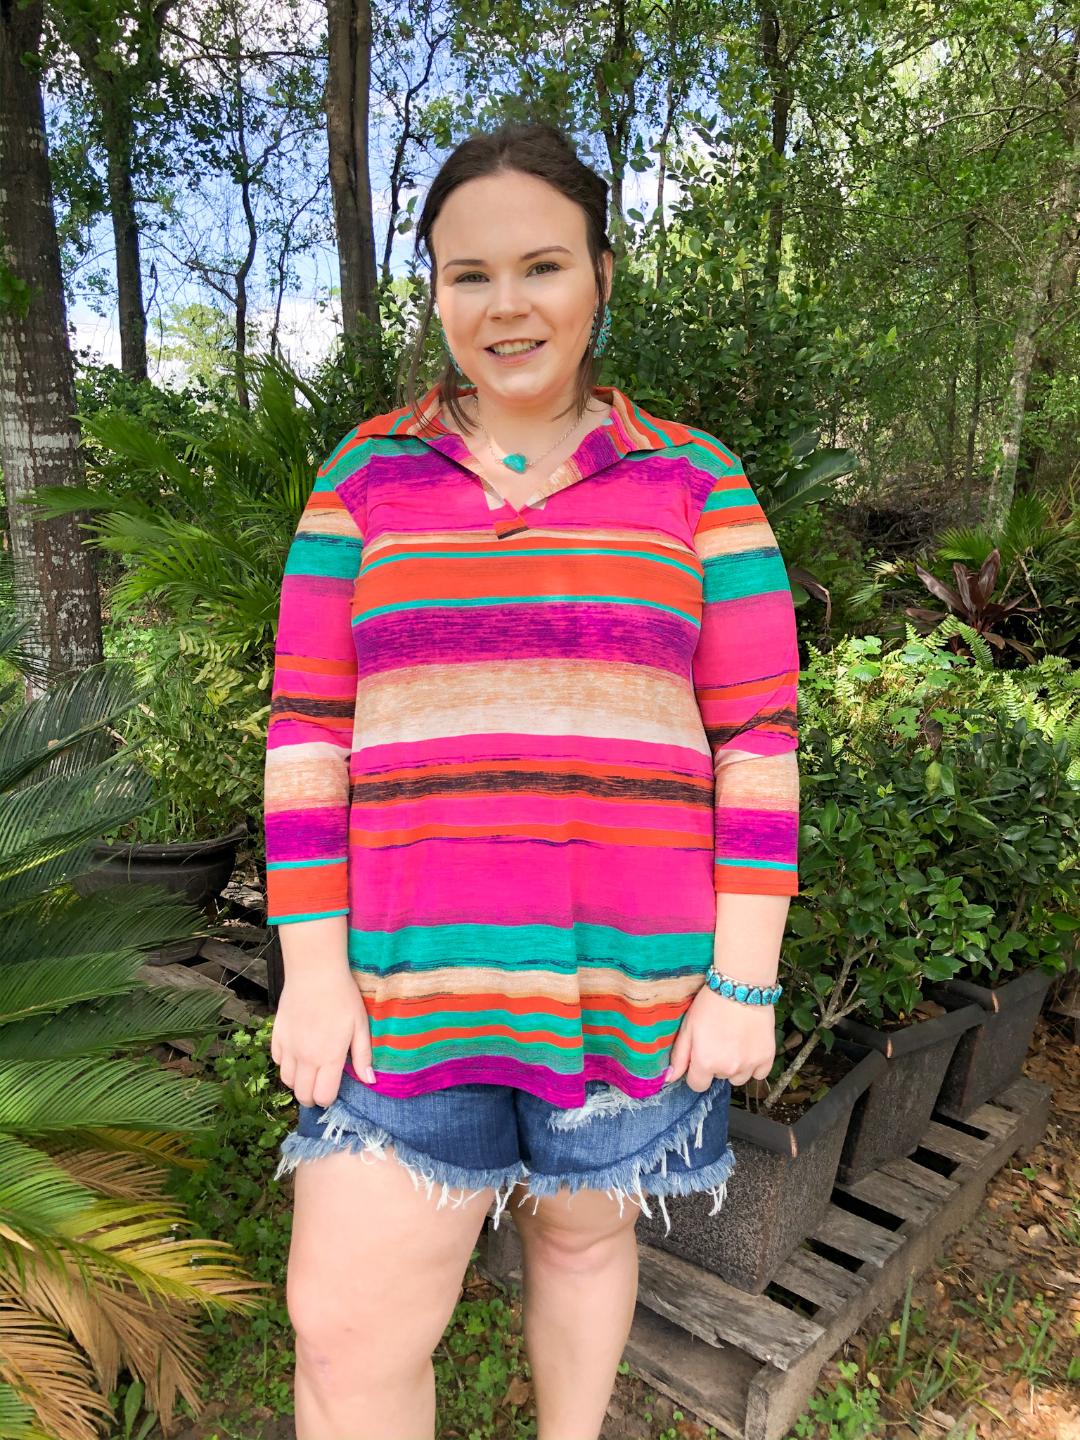 Last Chance Size Small | Scenic Route Serape Collared Tunic Top in Pink - Giddy Up Glamour Boutique